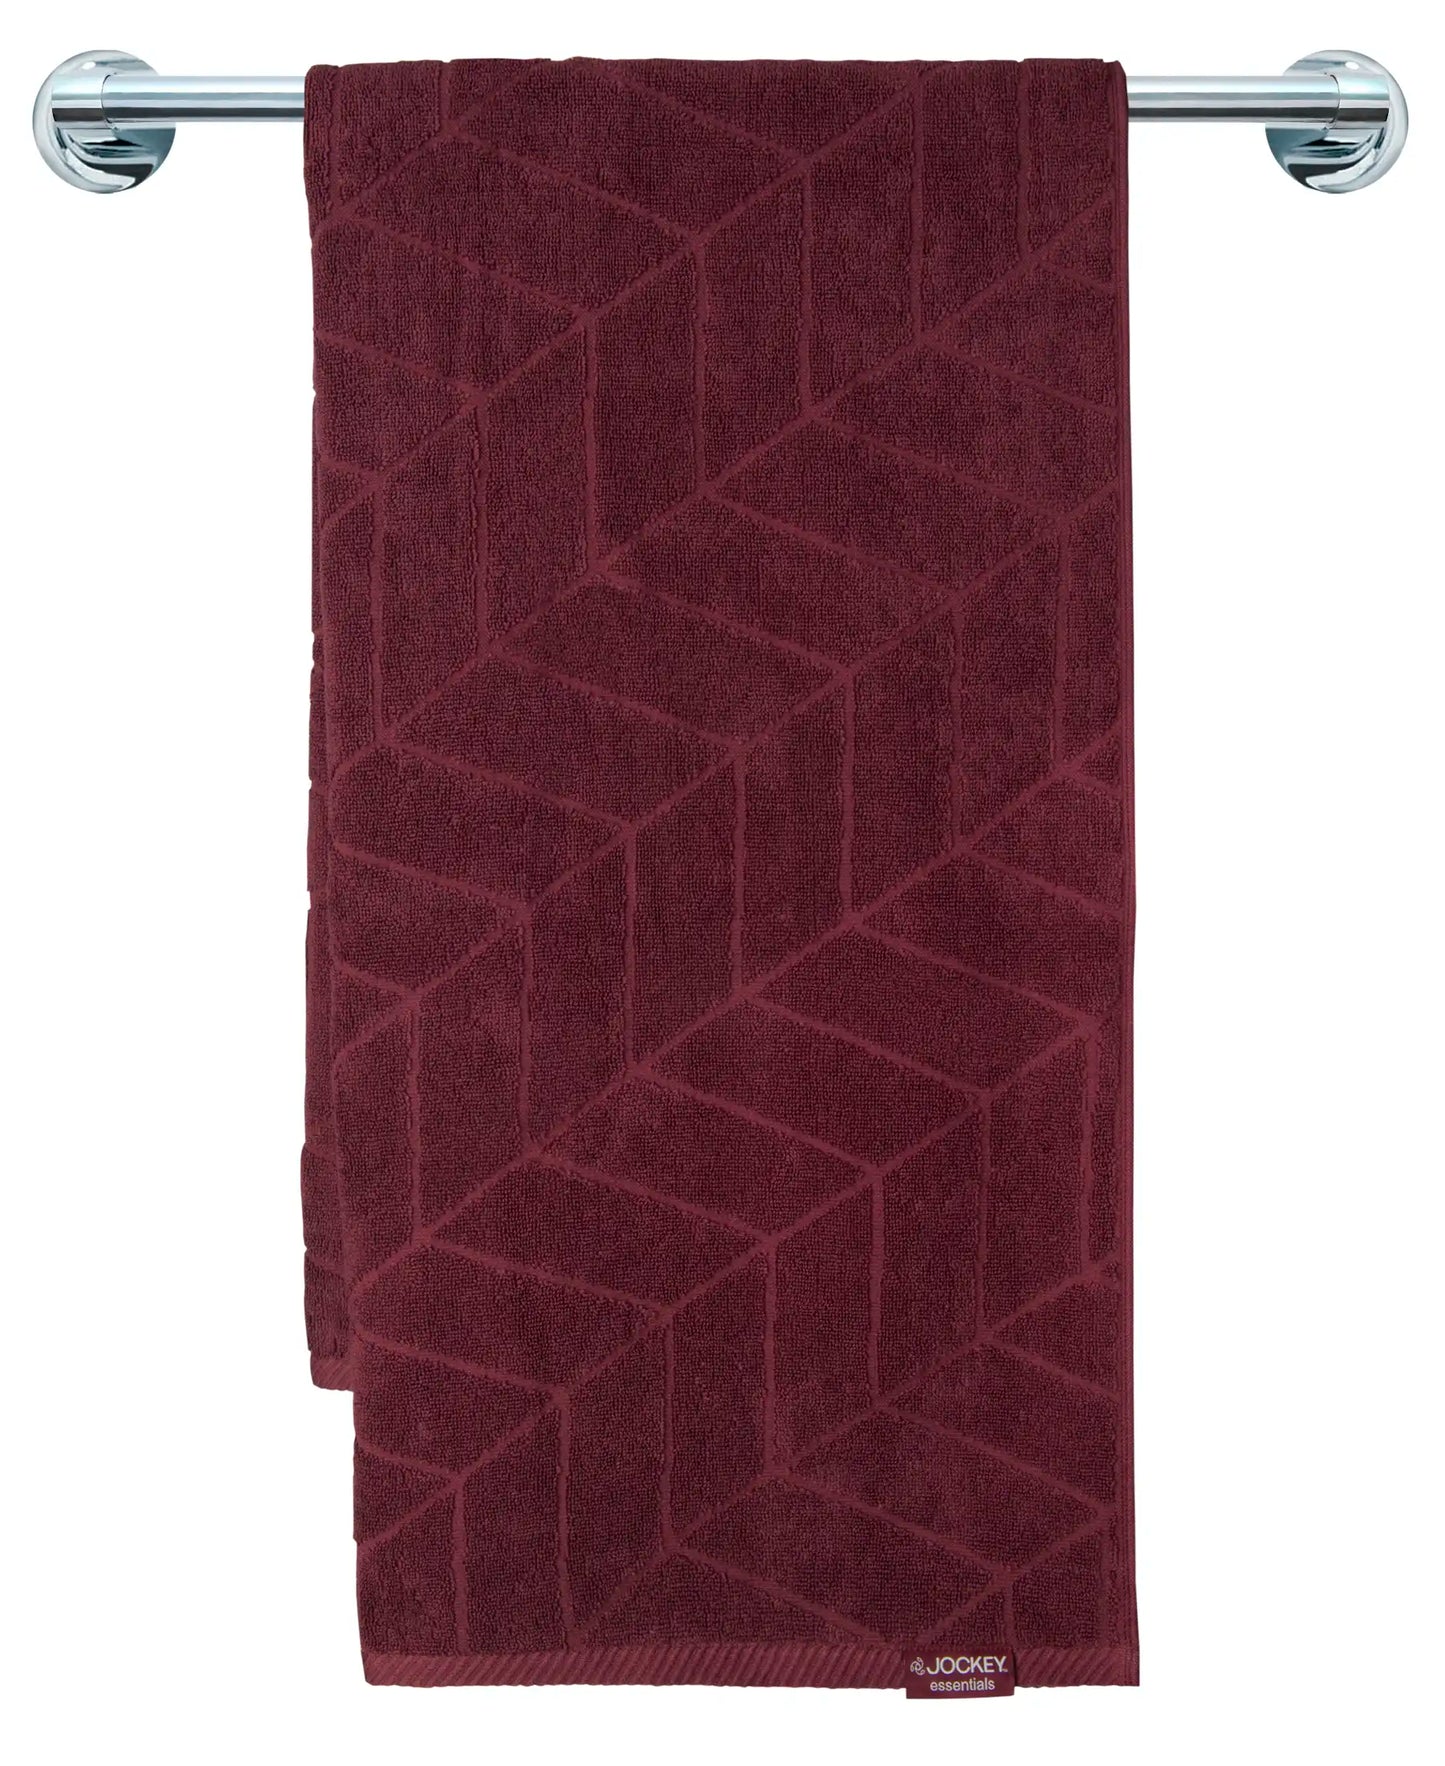 Cotton Terry Ultrasoft and Durable Patterned Bath Towel - Burgundy-3